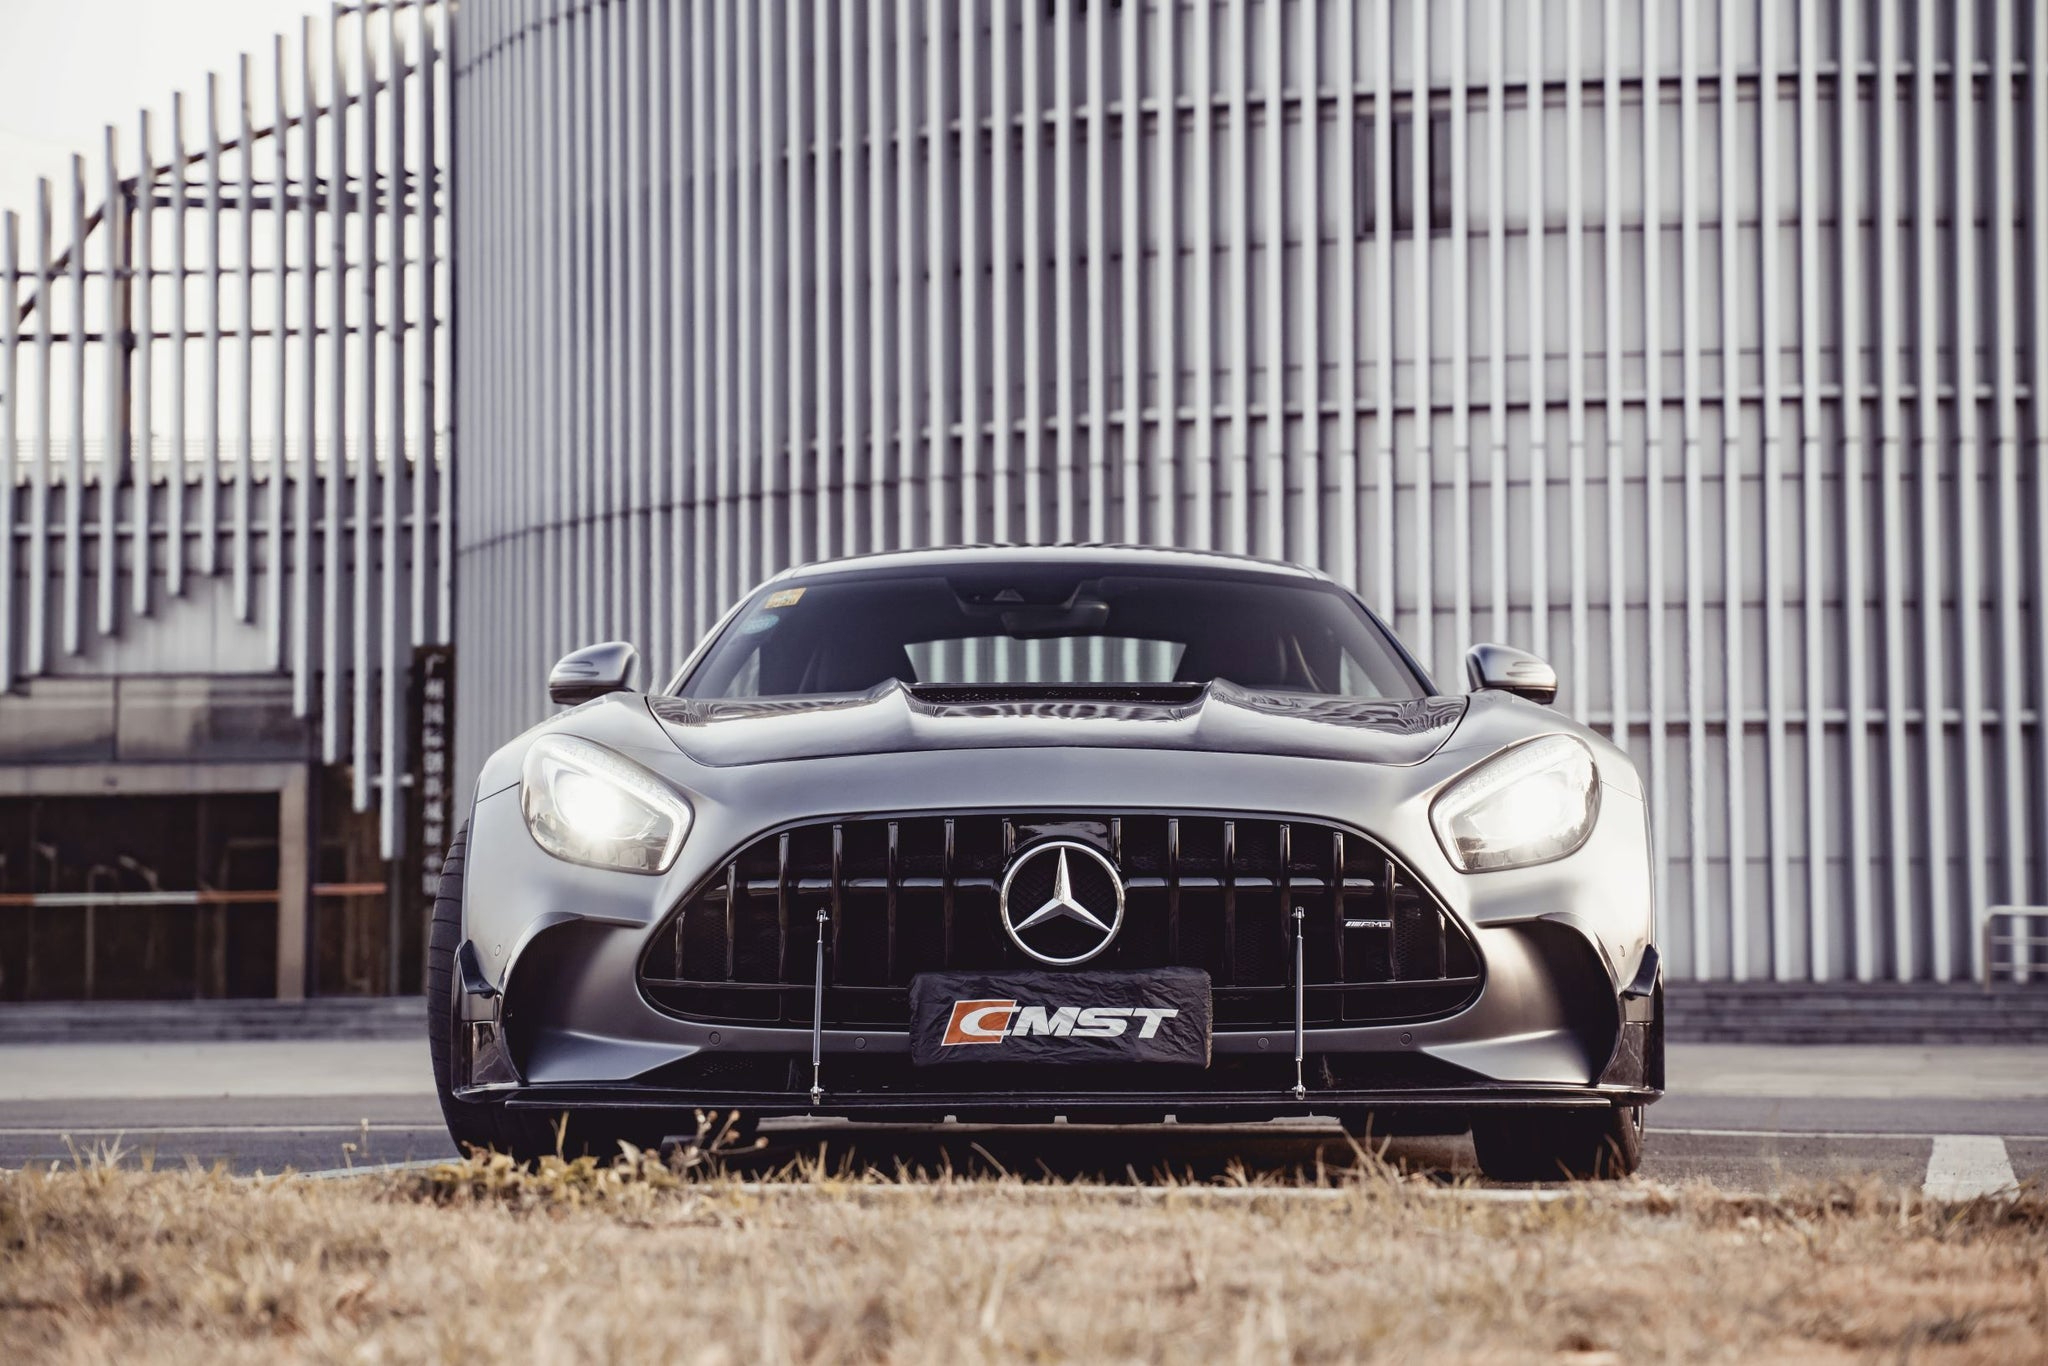 Check our price and buy CMST Carbon Fiber Body Kit set for Mercedes Benz AMG GT C190